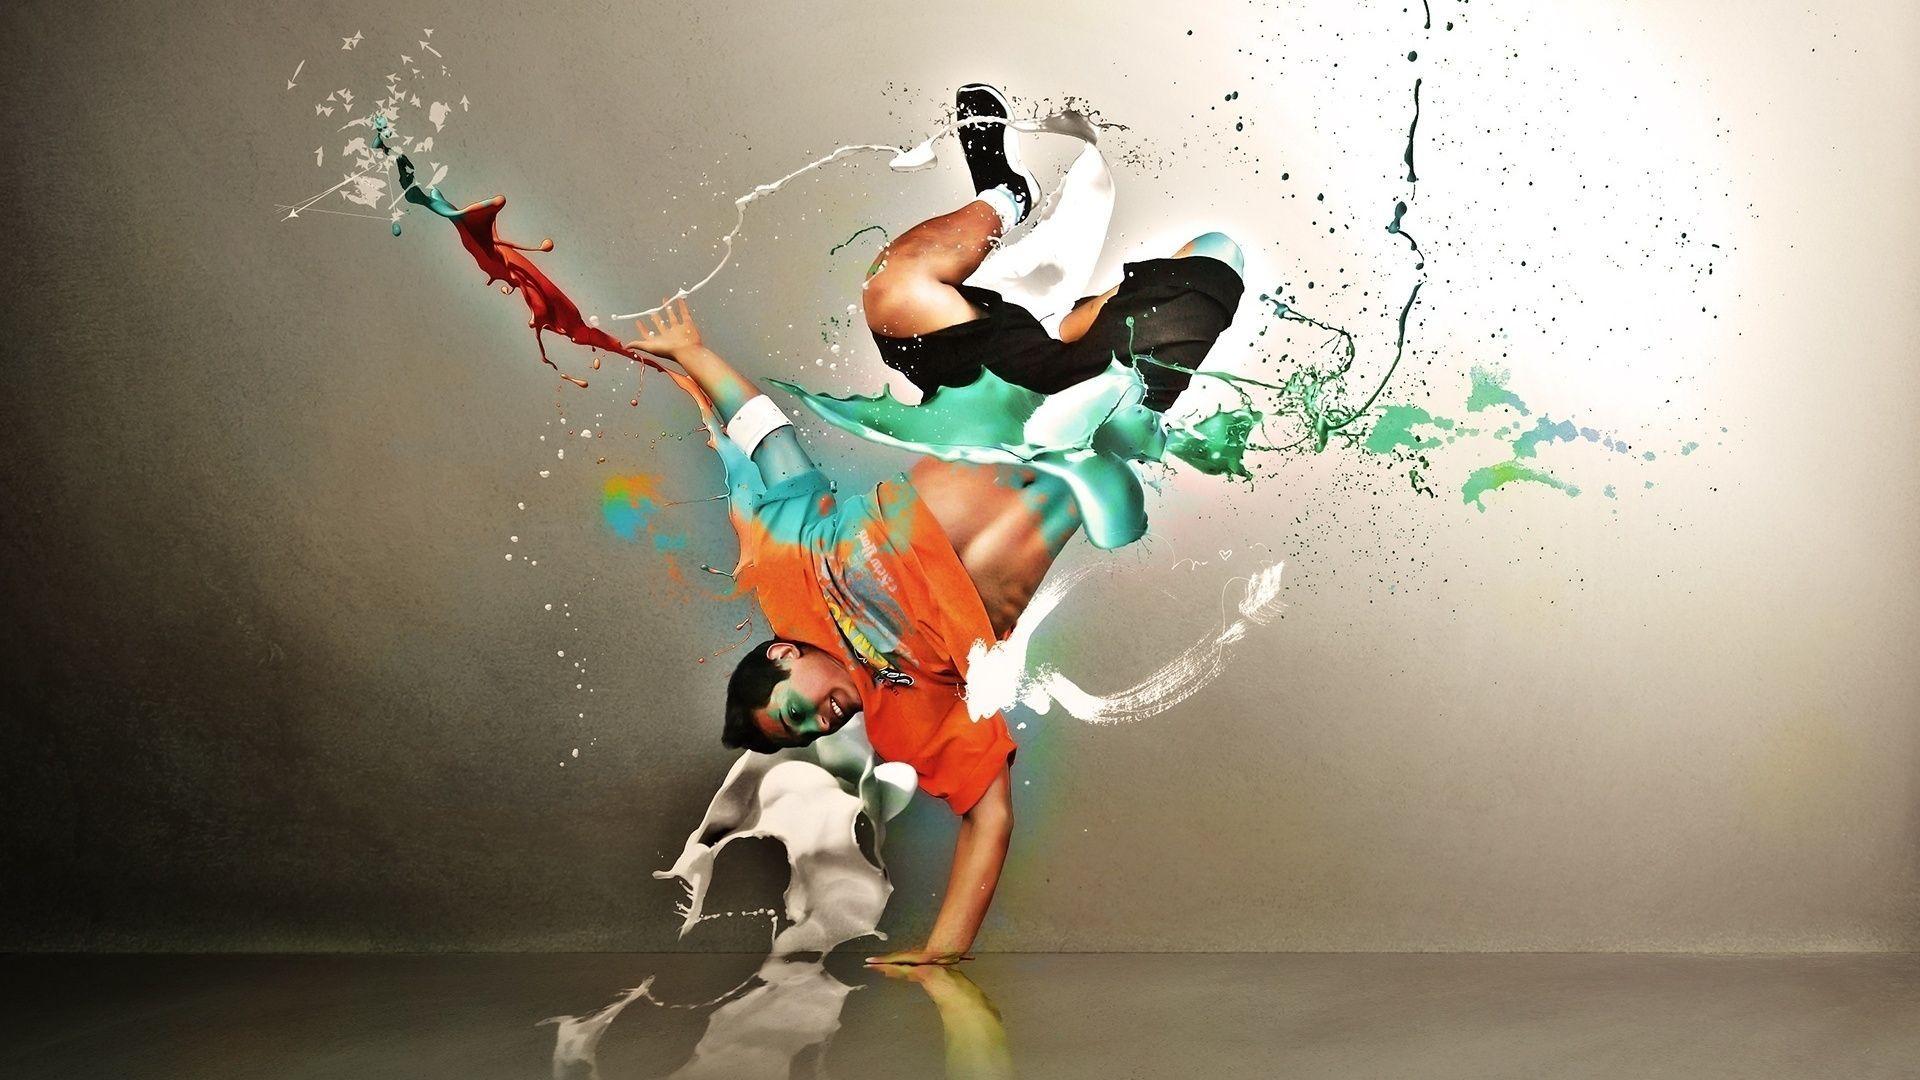 Break Dancer Cool Graphic. HD Dance and Music Wallpaper for Mobile